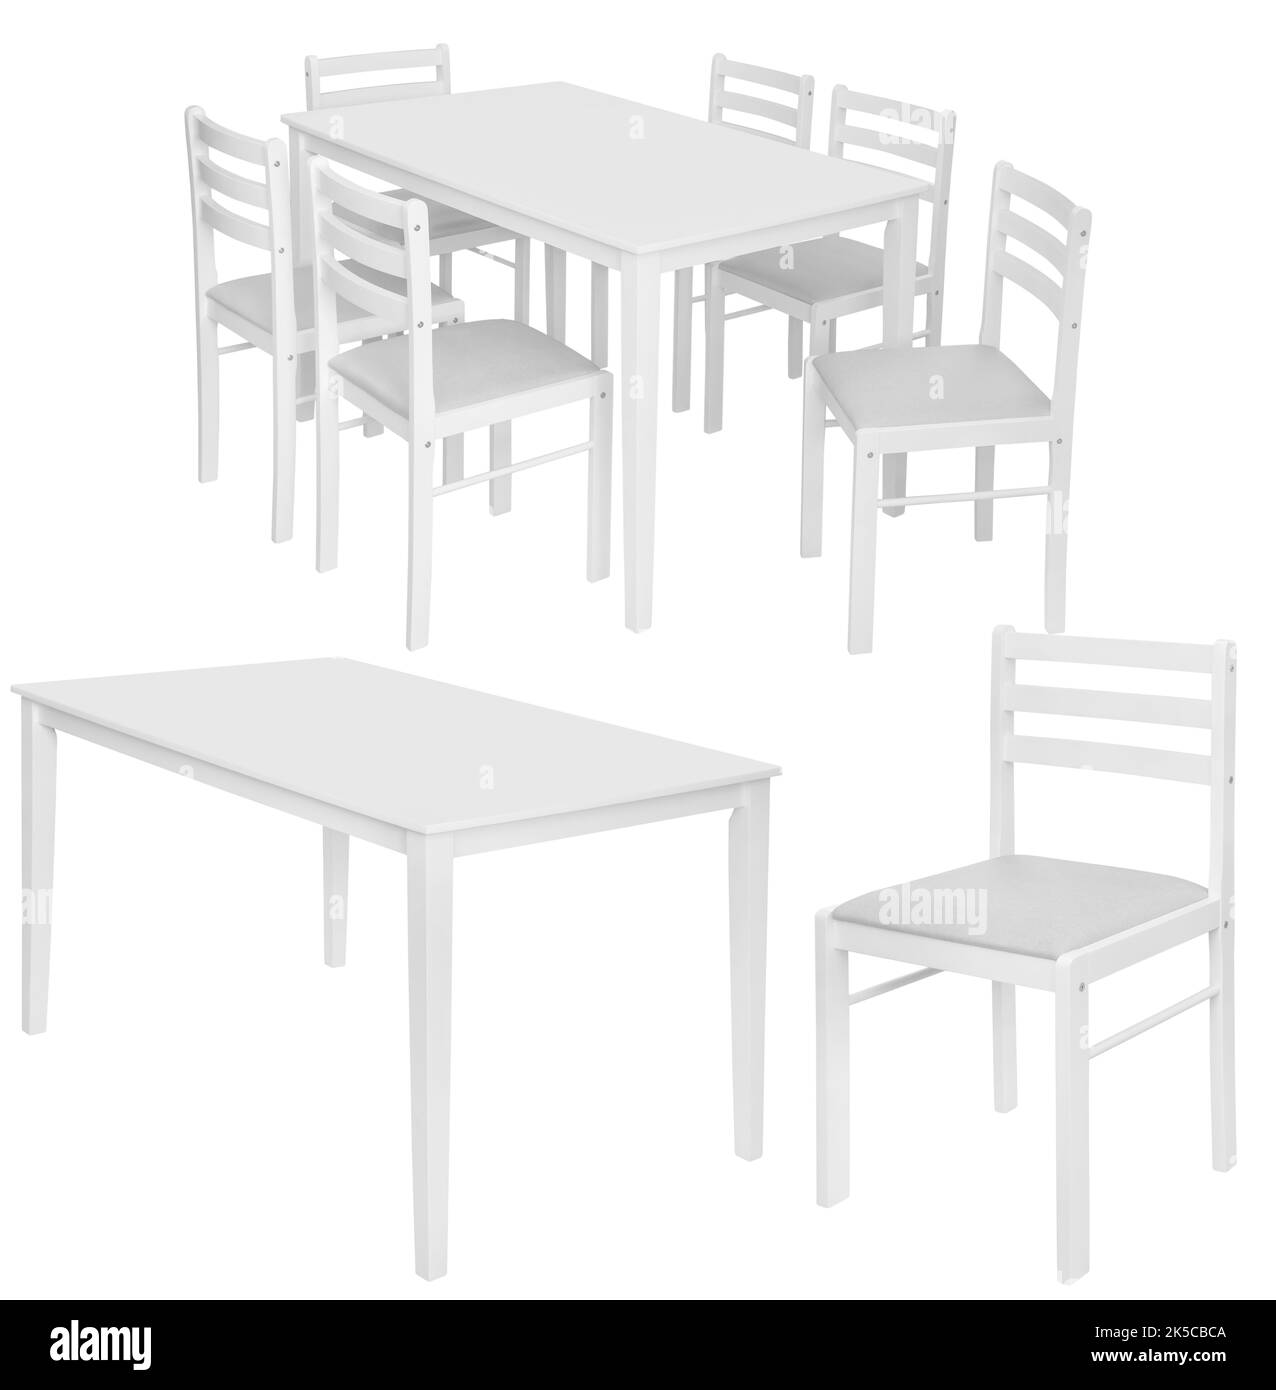 A set of kitchen furniture from a table and chairs. Isolated from the background. Interior element Stock Photo